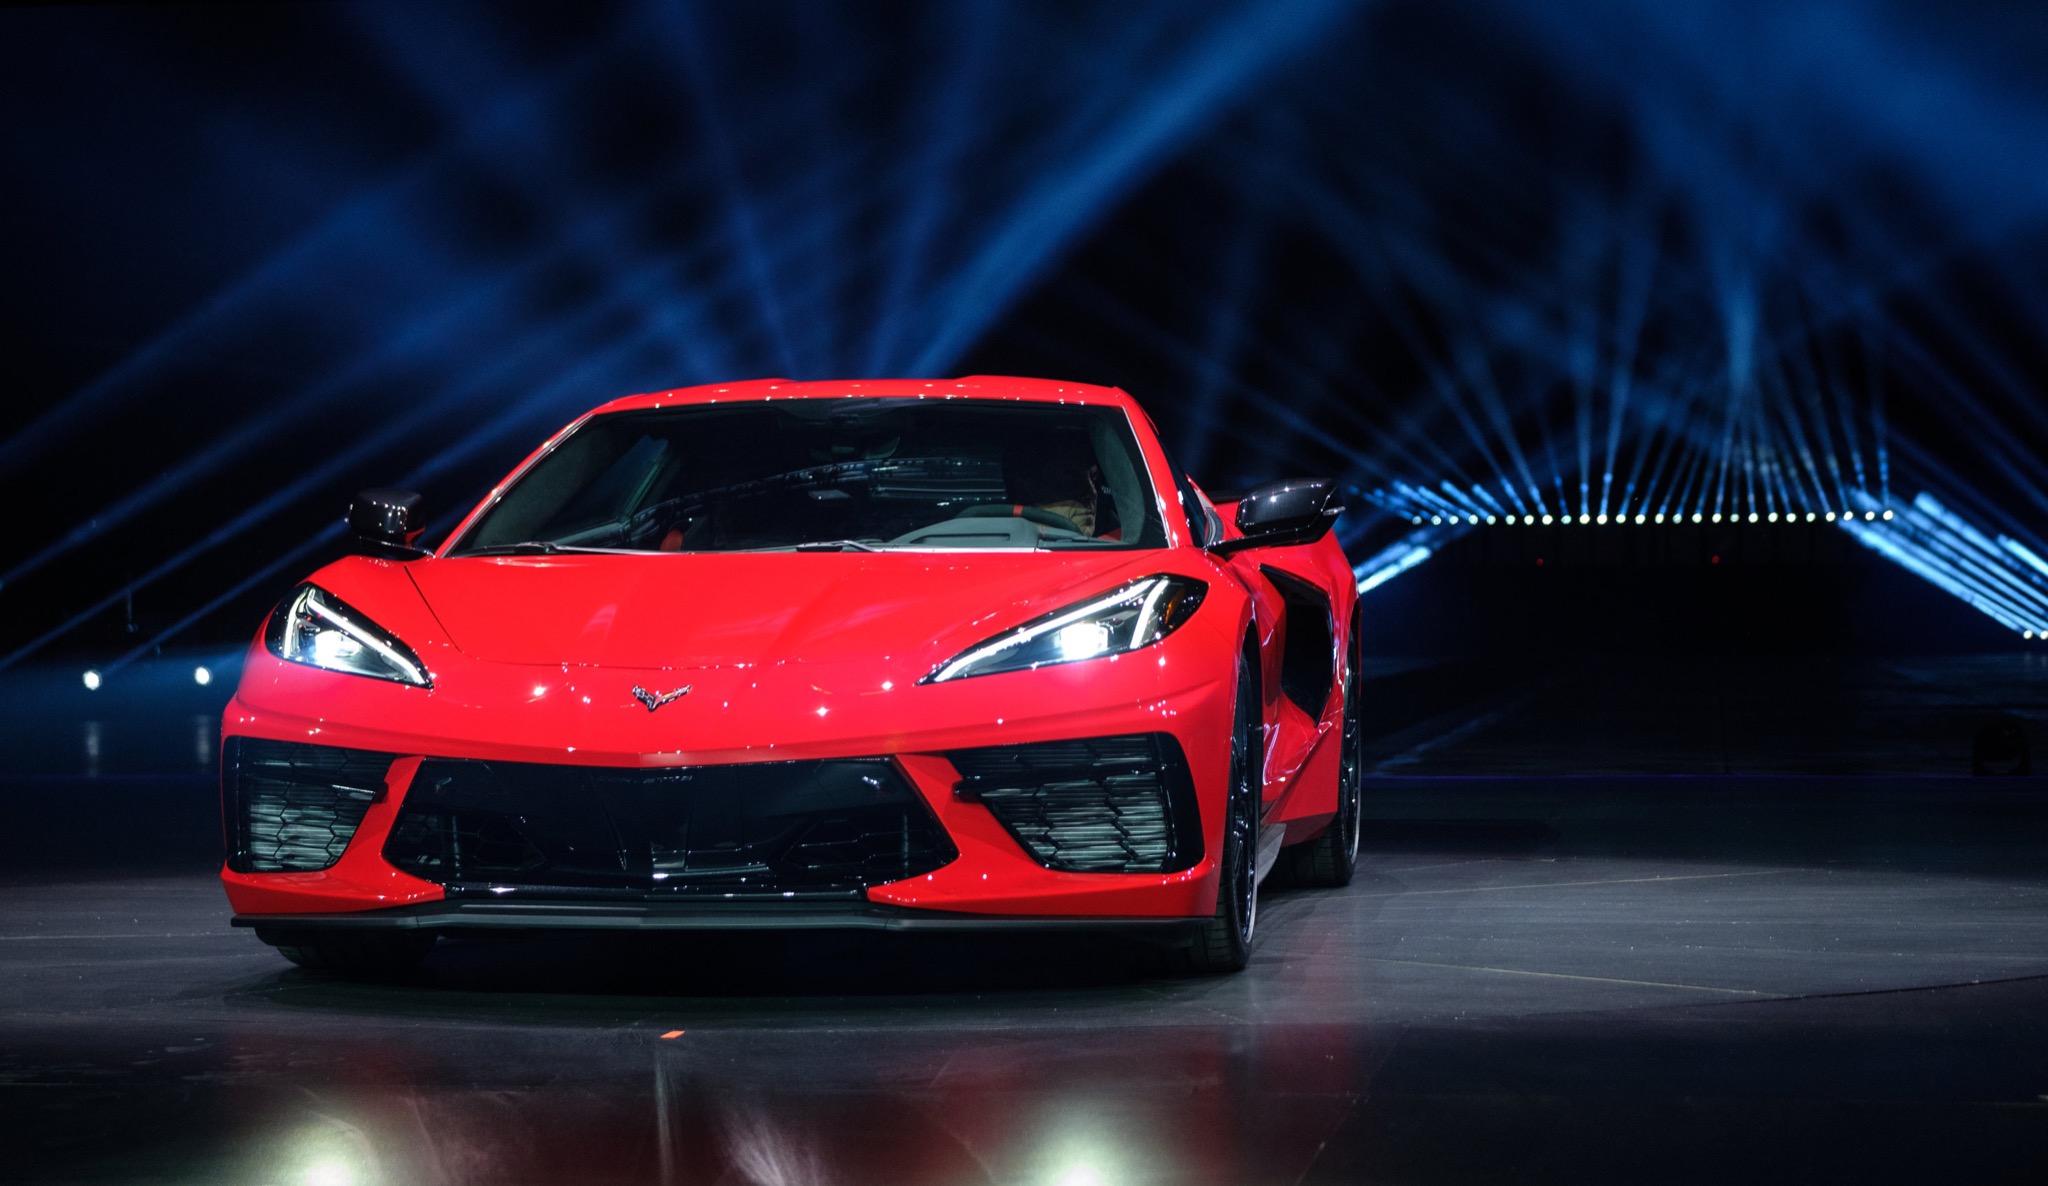 The 2020 Corvette is Chevy's first American supercar